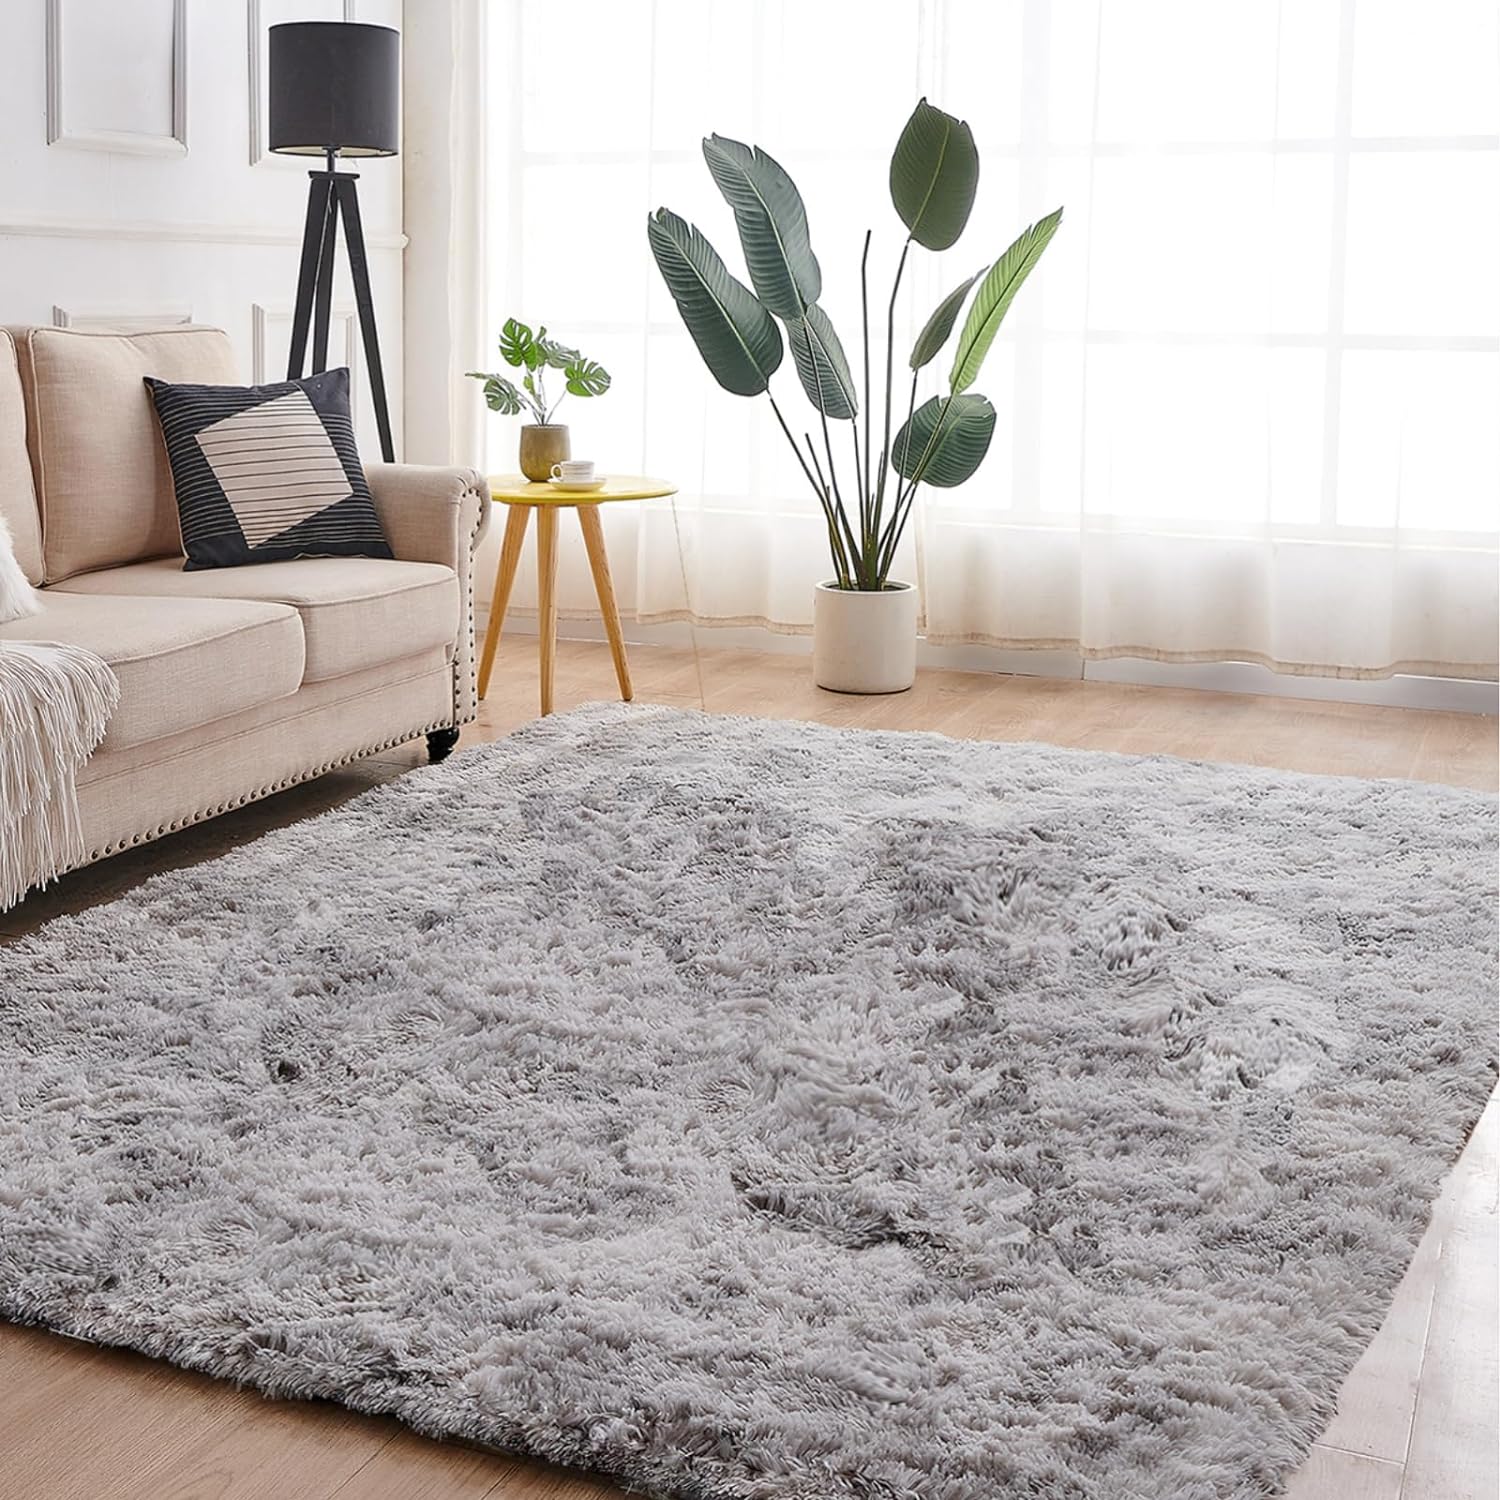 this rug is extremely soft, much more than i expected. it is super easy to clean . i used it for my bedroom and this looks so much classy and quality is extremely good. The price is also extremely reasonable compared to its quality i love this addition to my bedroom